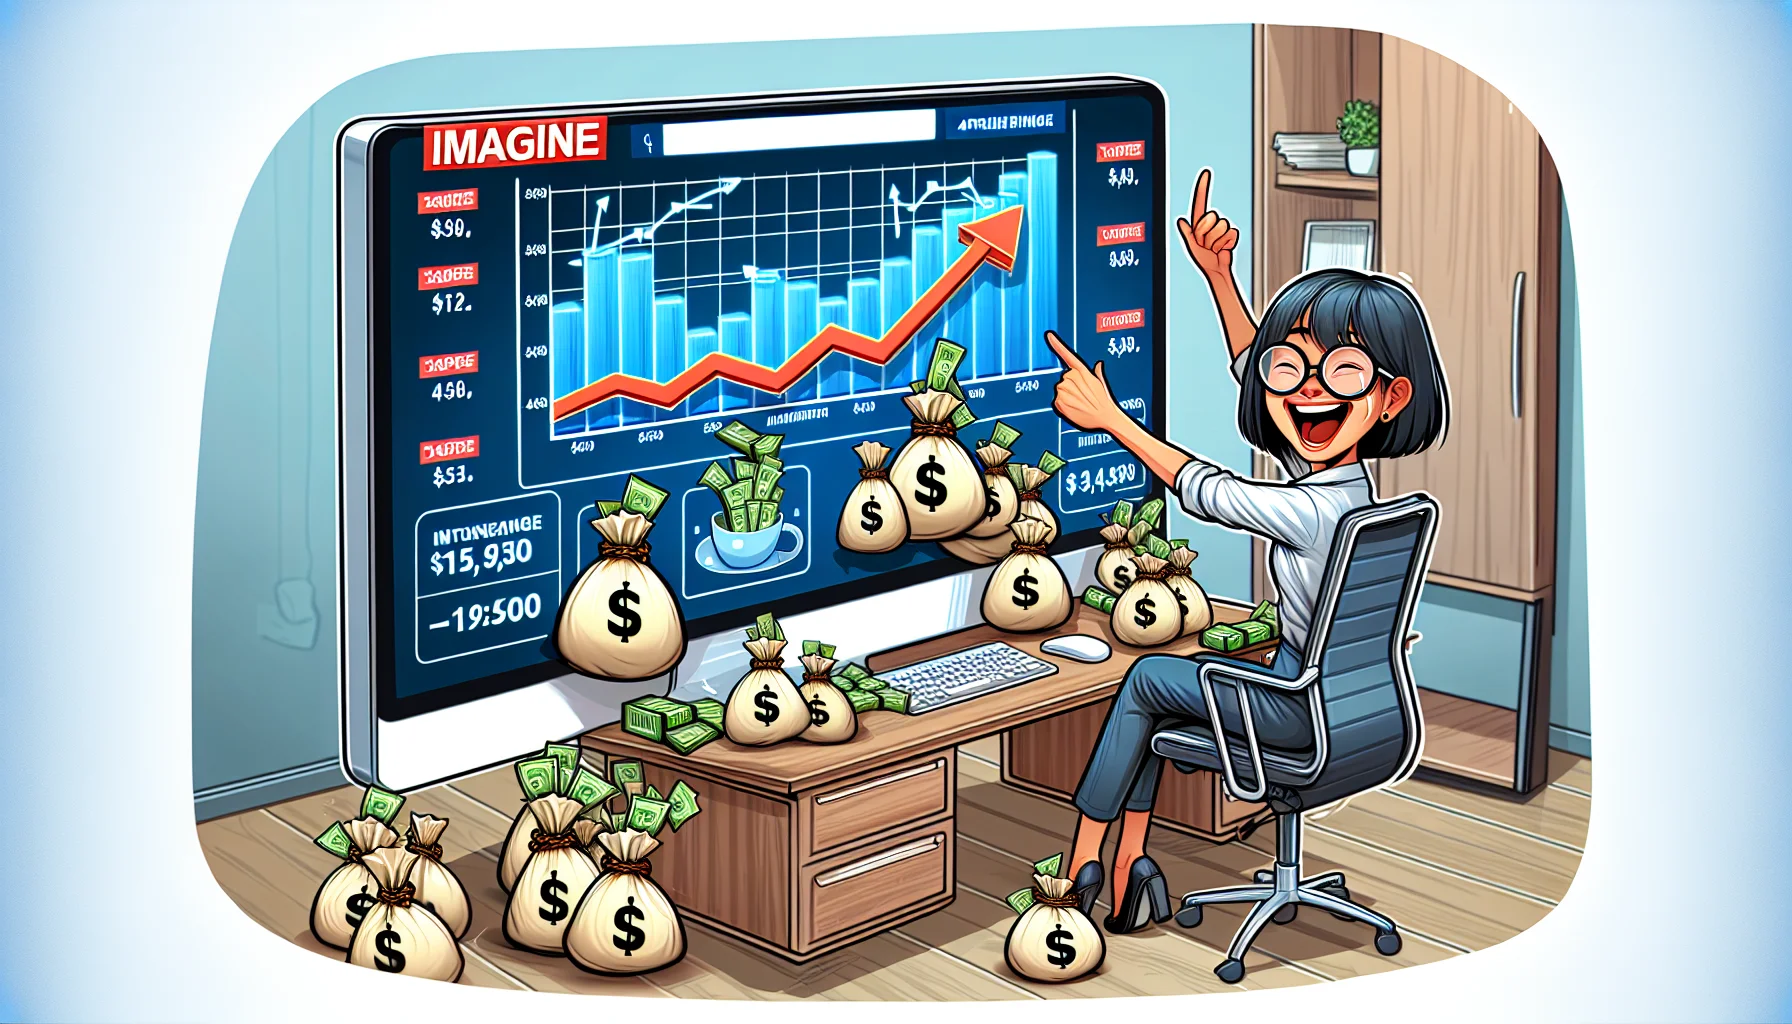 Imagine a humorous scene where a person is enthusiastically showing off the success of their affiliate program. The person, who is an Asian female, sits in a stylish modern home office, pointing excitedly at a computer monitor displaying attractive and eye-catching graphs about the growth of affiliate earnings. Amidst all this, cartoon-like bags of cash continuously jump out of the computer screen and overflow beyond the desk, playfully representing the potential money earned from online affiliate programs. Note that the screen graphics simply suggest the idea of affiliate marketing without directly referring to any specific brands or programs.